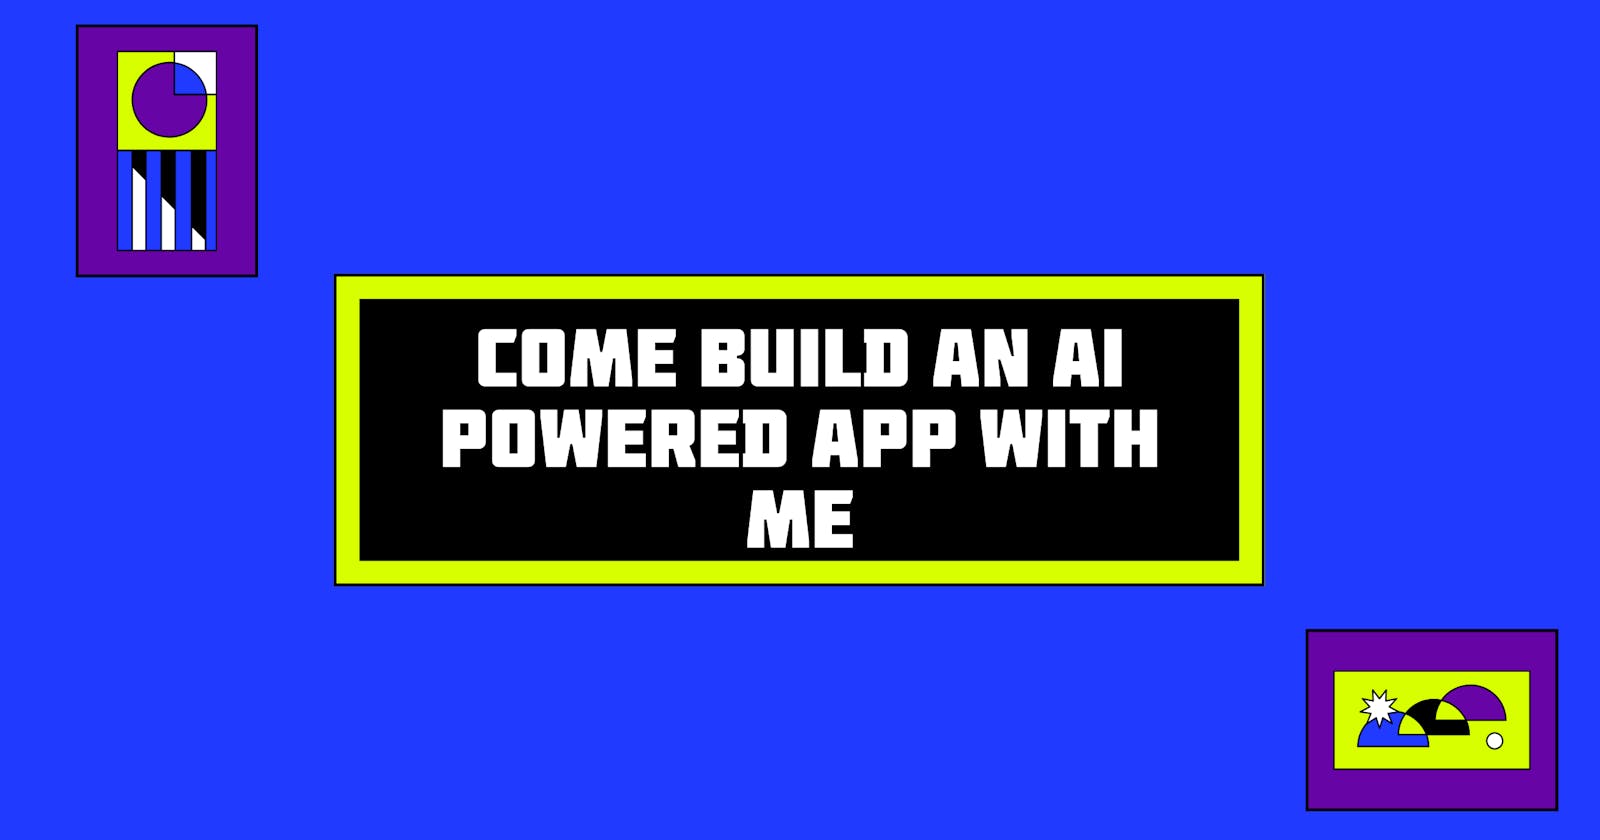 Cover Image for Come build an AI powered app with me